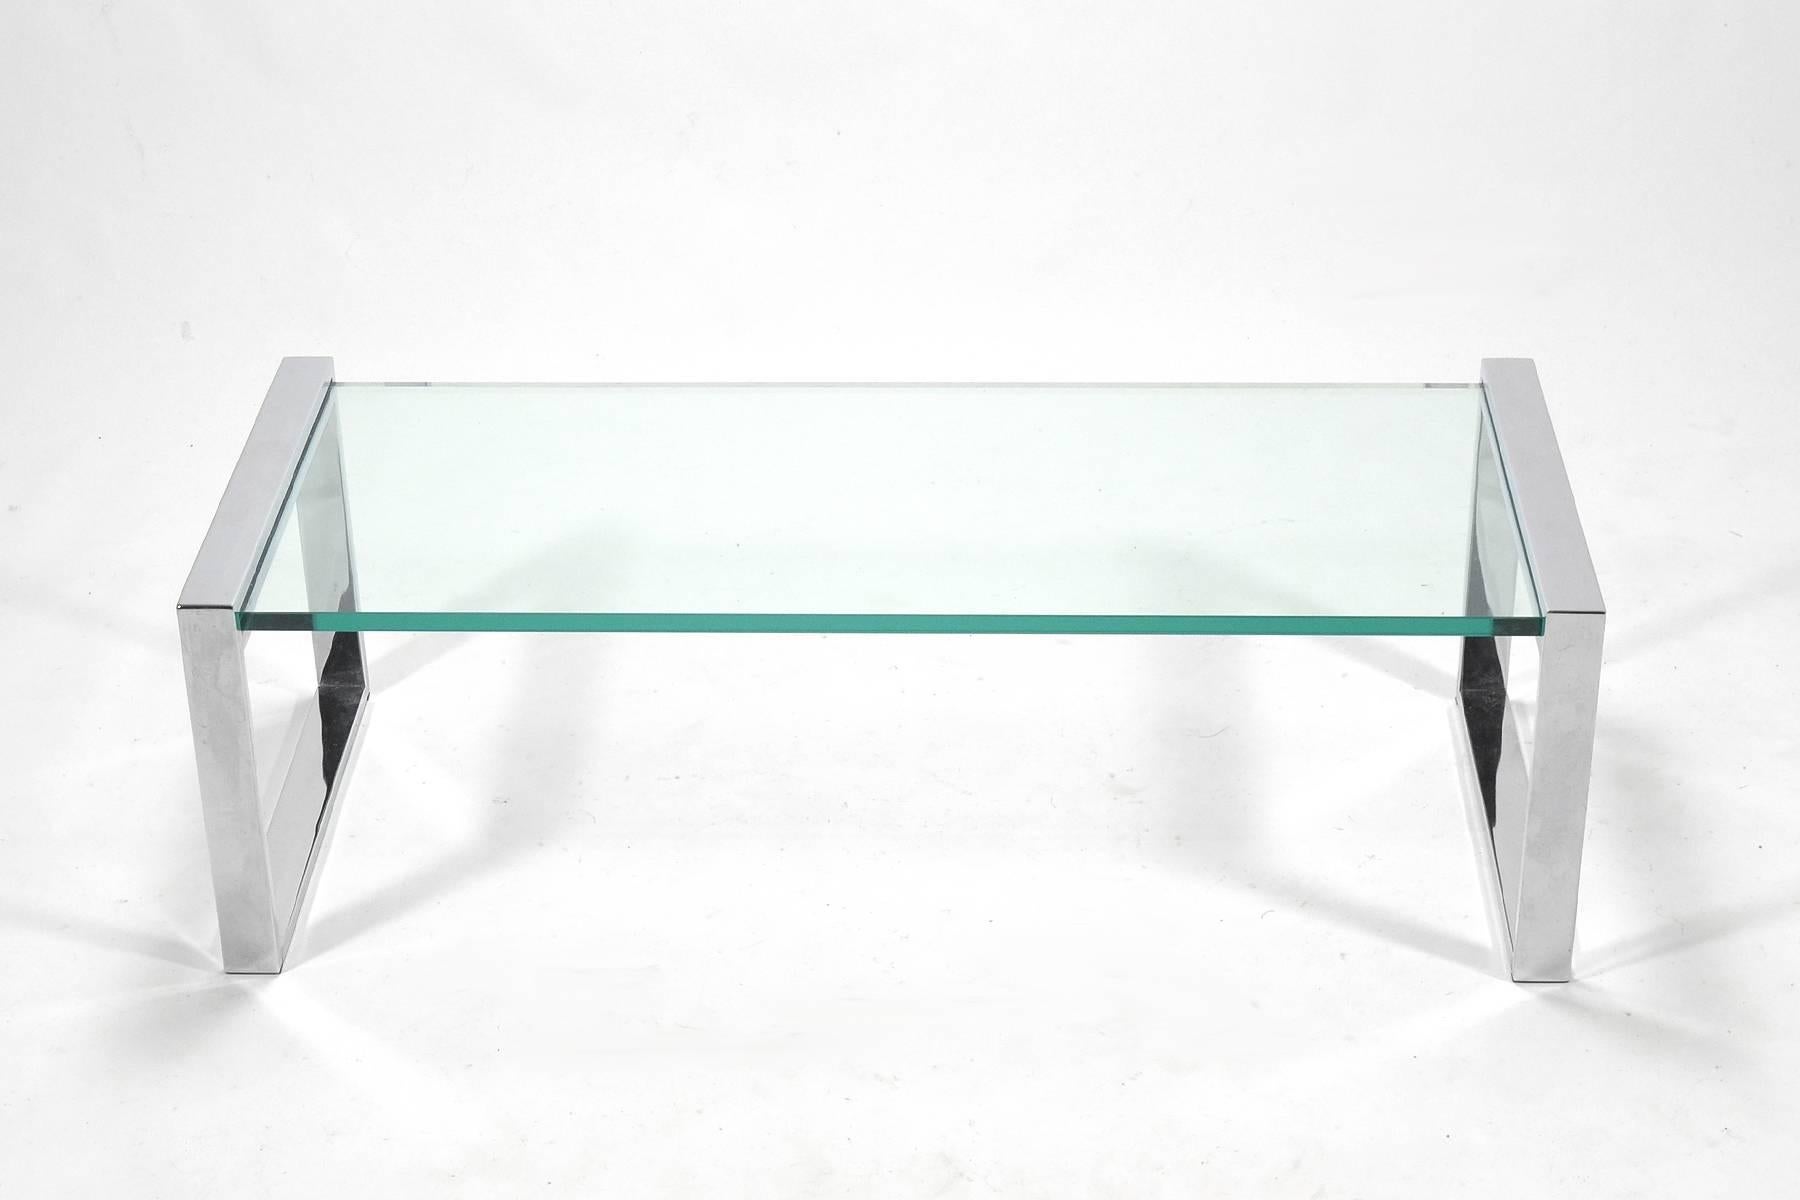 Plated Cy Mann Chrome and Glass Coffee Table